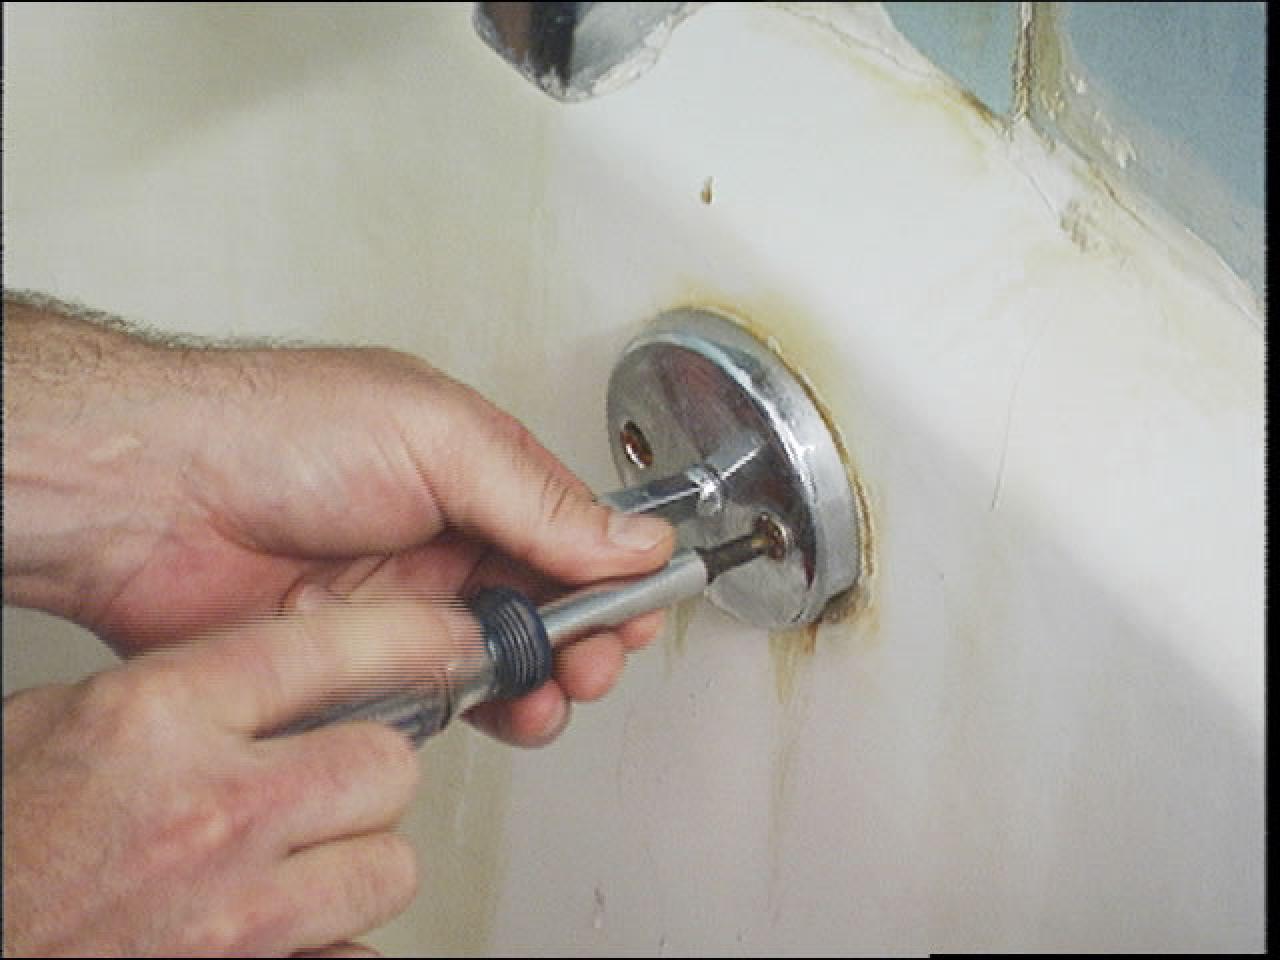 Unclog A Bathtub Using The Trip Lever, How To Get Hair Out Of Your Bathtub Drain